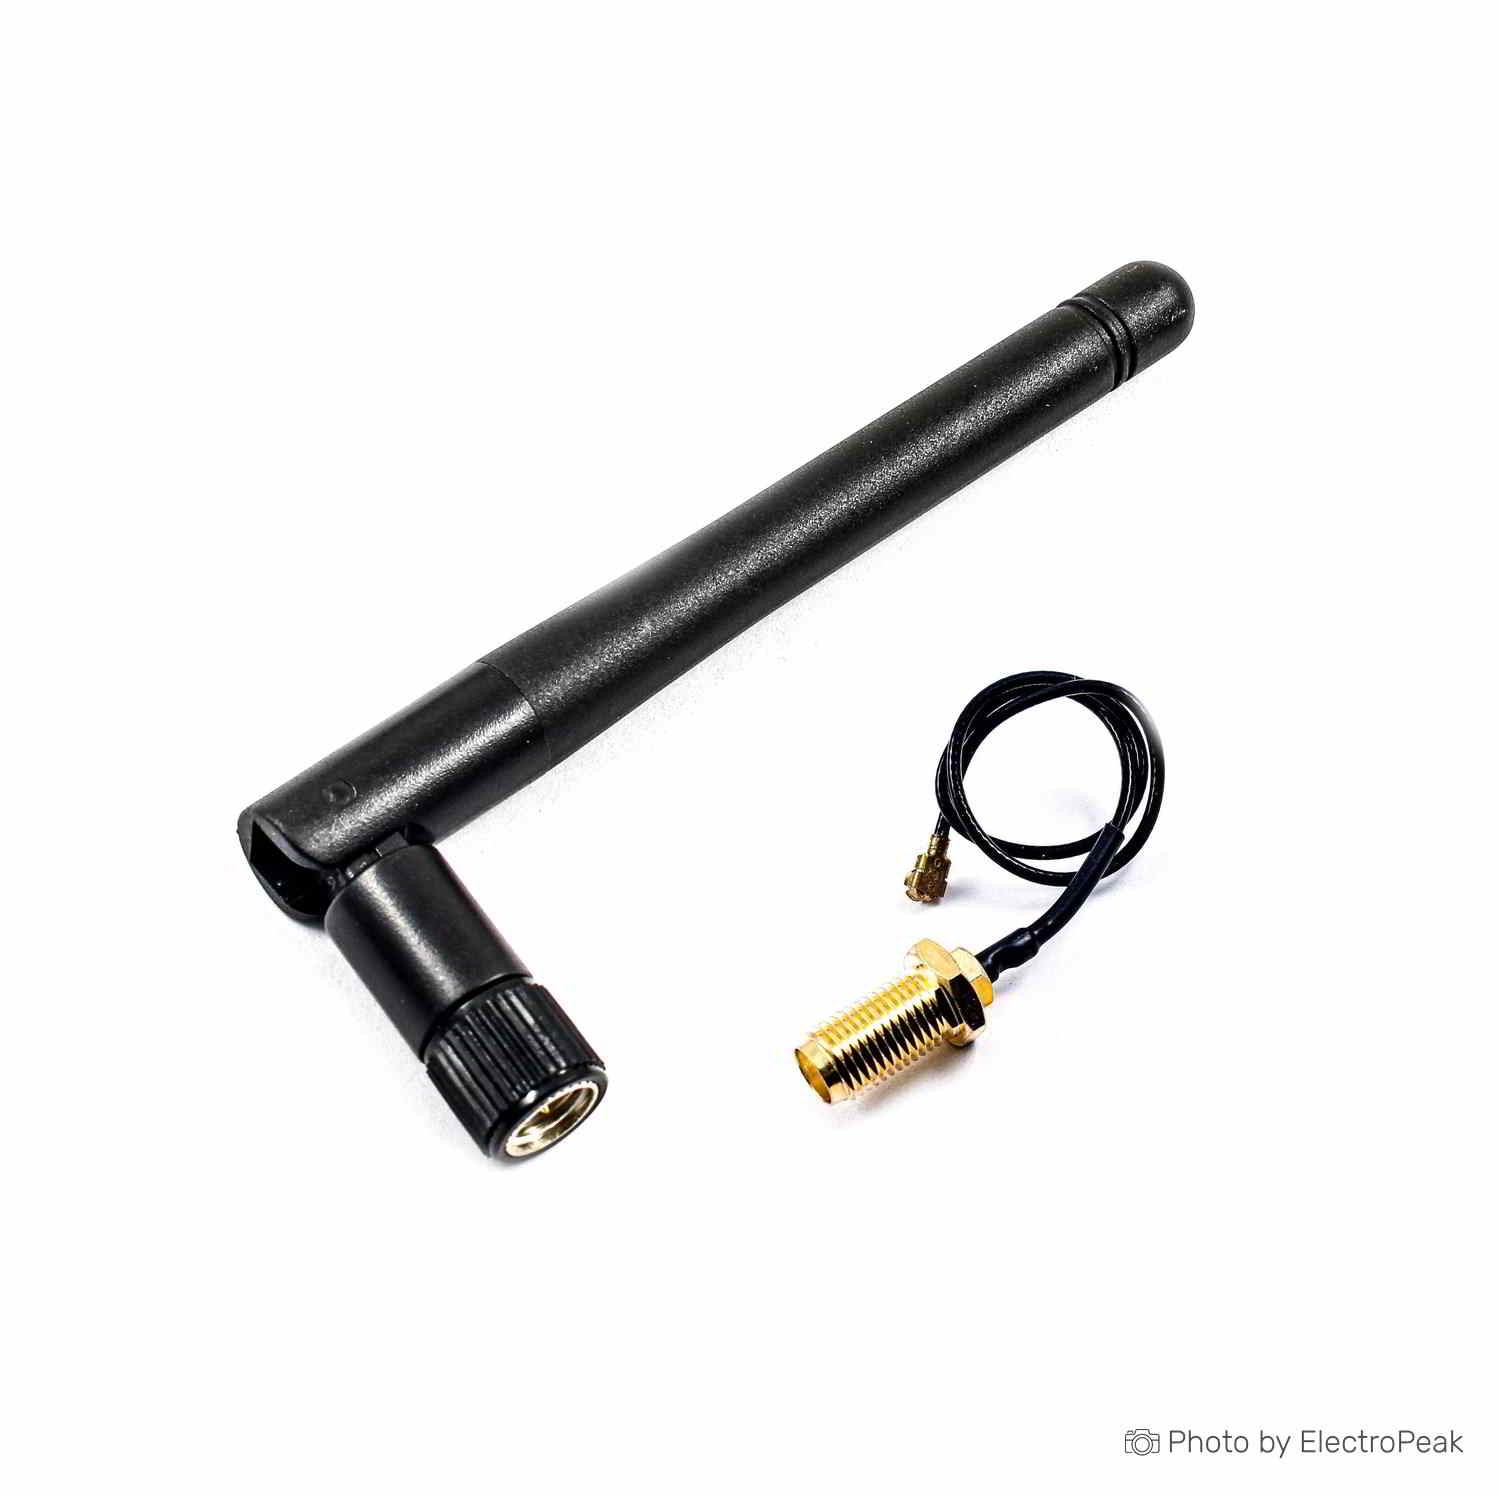 External 2.4 GHz Wifi Antenna with Cable IPEX IPX to Internet Antenna for  Communication 2.4G